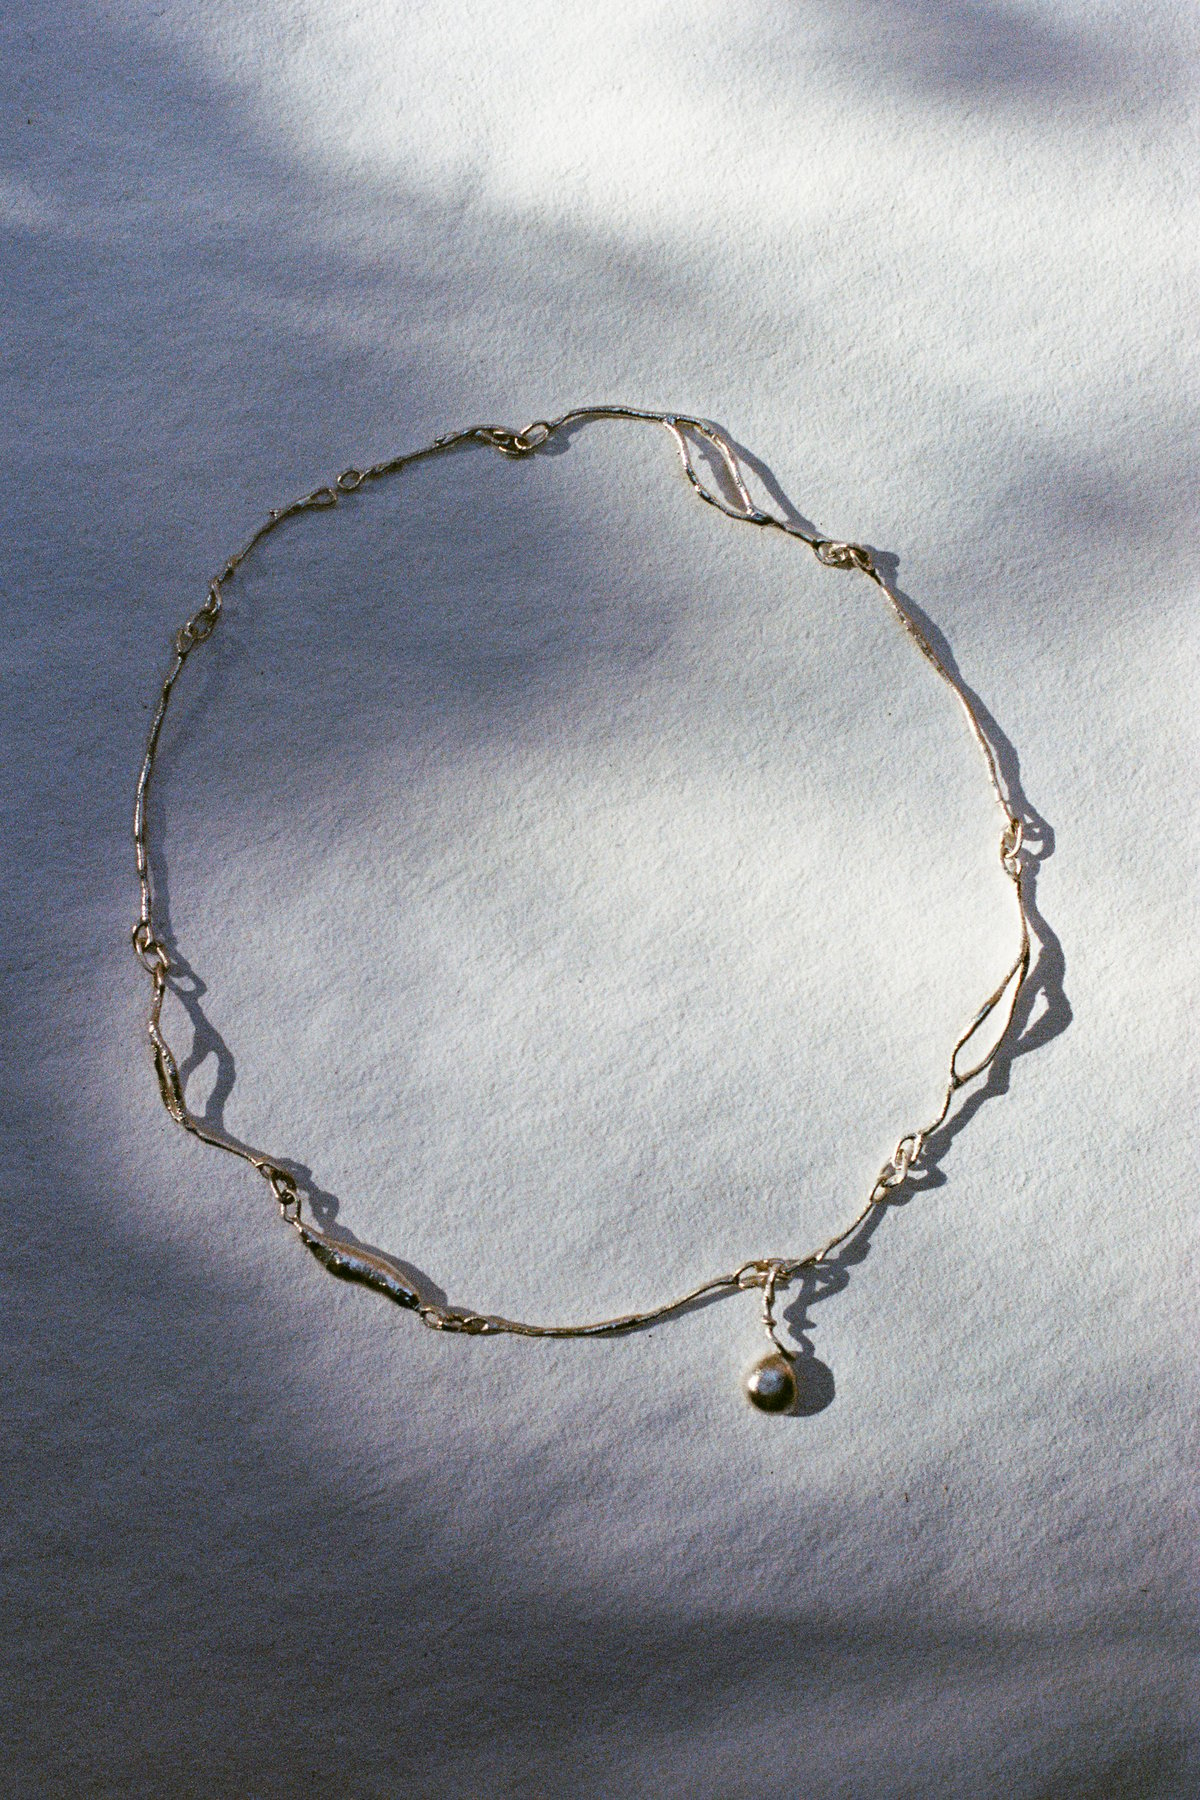 Image of Edition 5. Piece 10. Necklace 